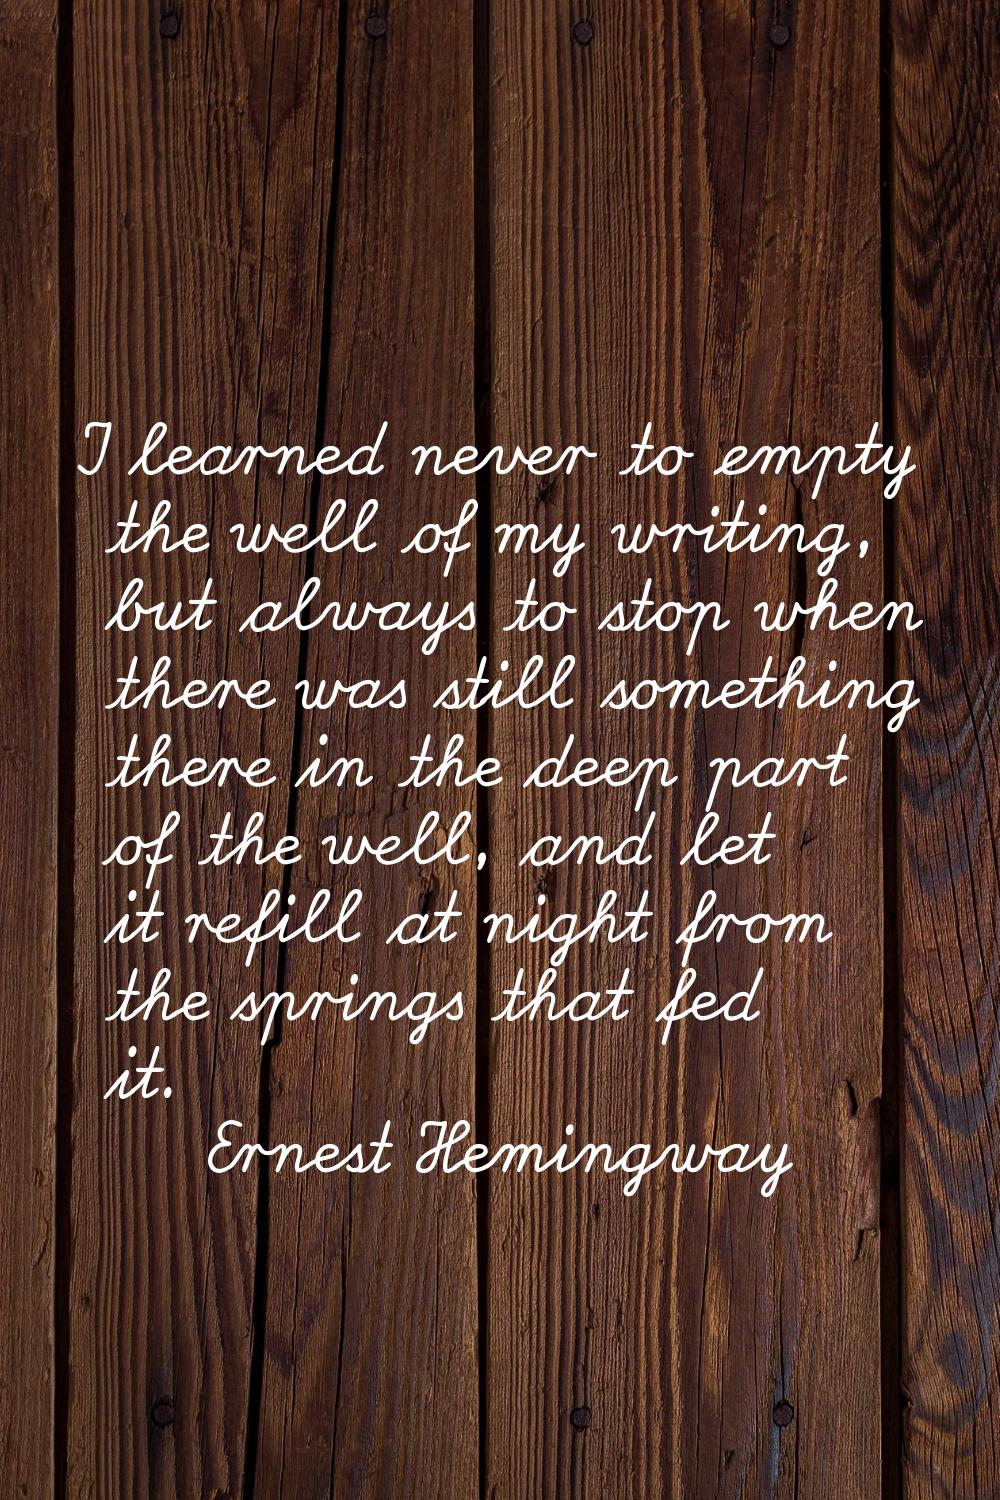 I learned never to empty the well of my writing, but always to stop when there was still something 